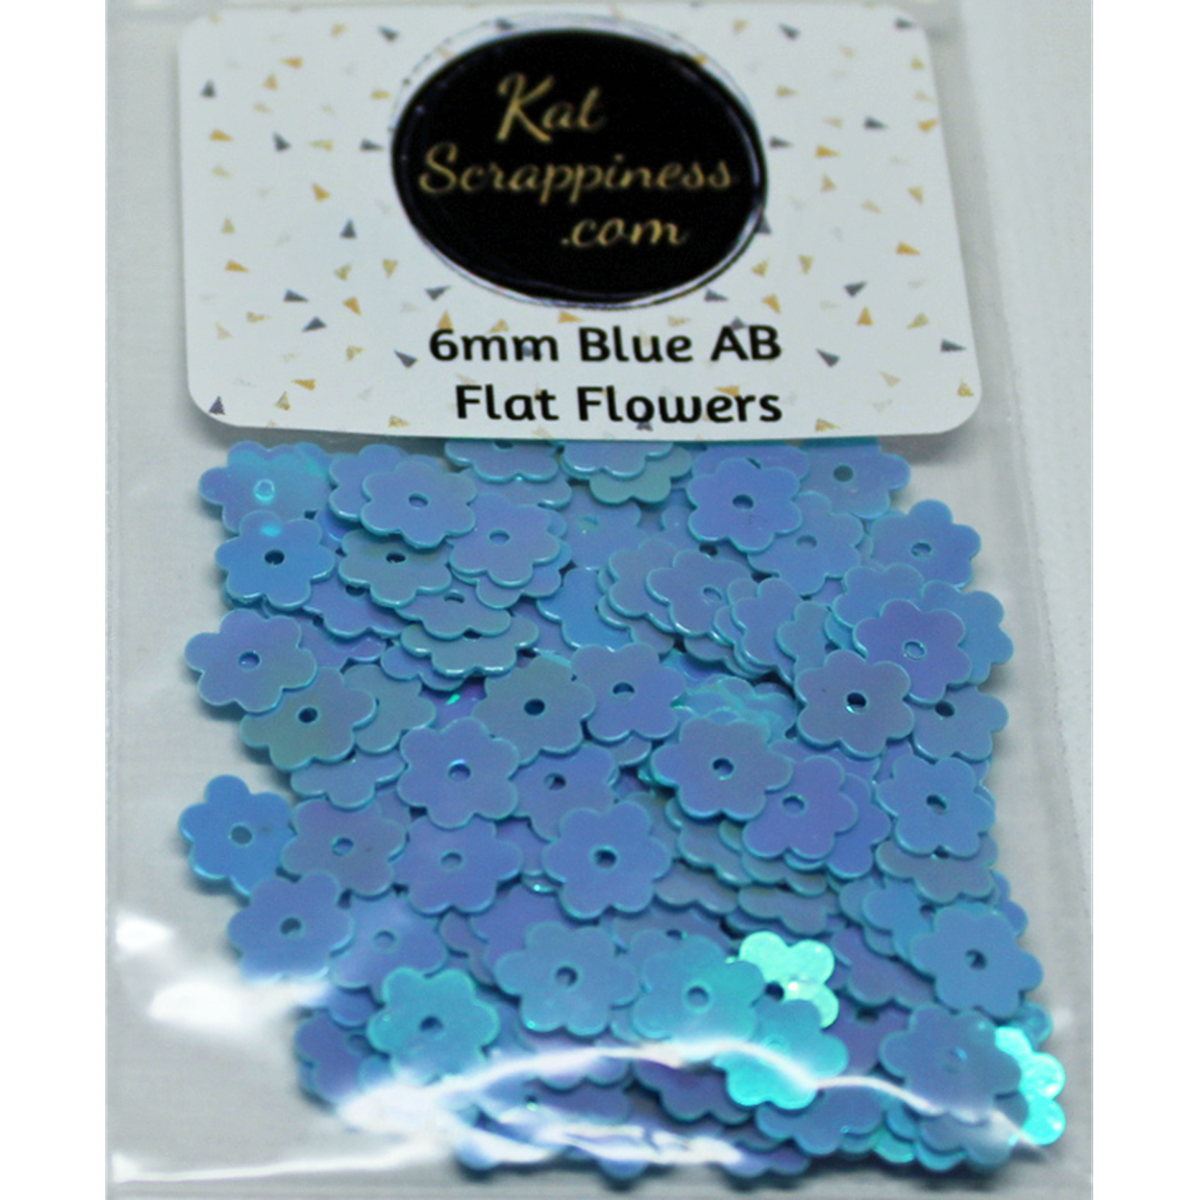 6mm Blue AB Flat Flower Sequins Shaker Card Fillers - Kat Scrappiness